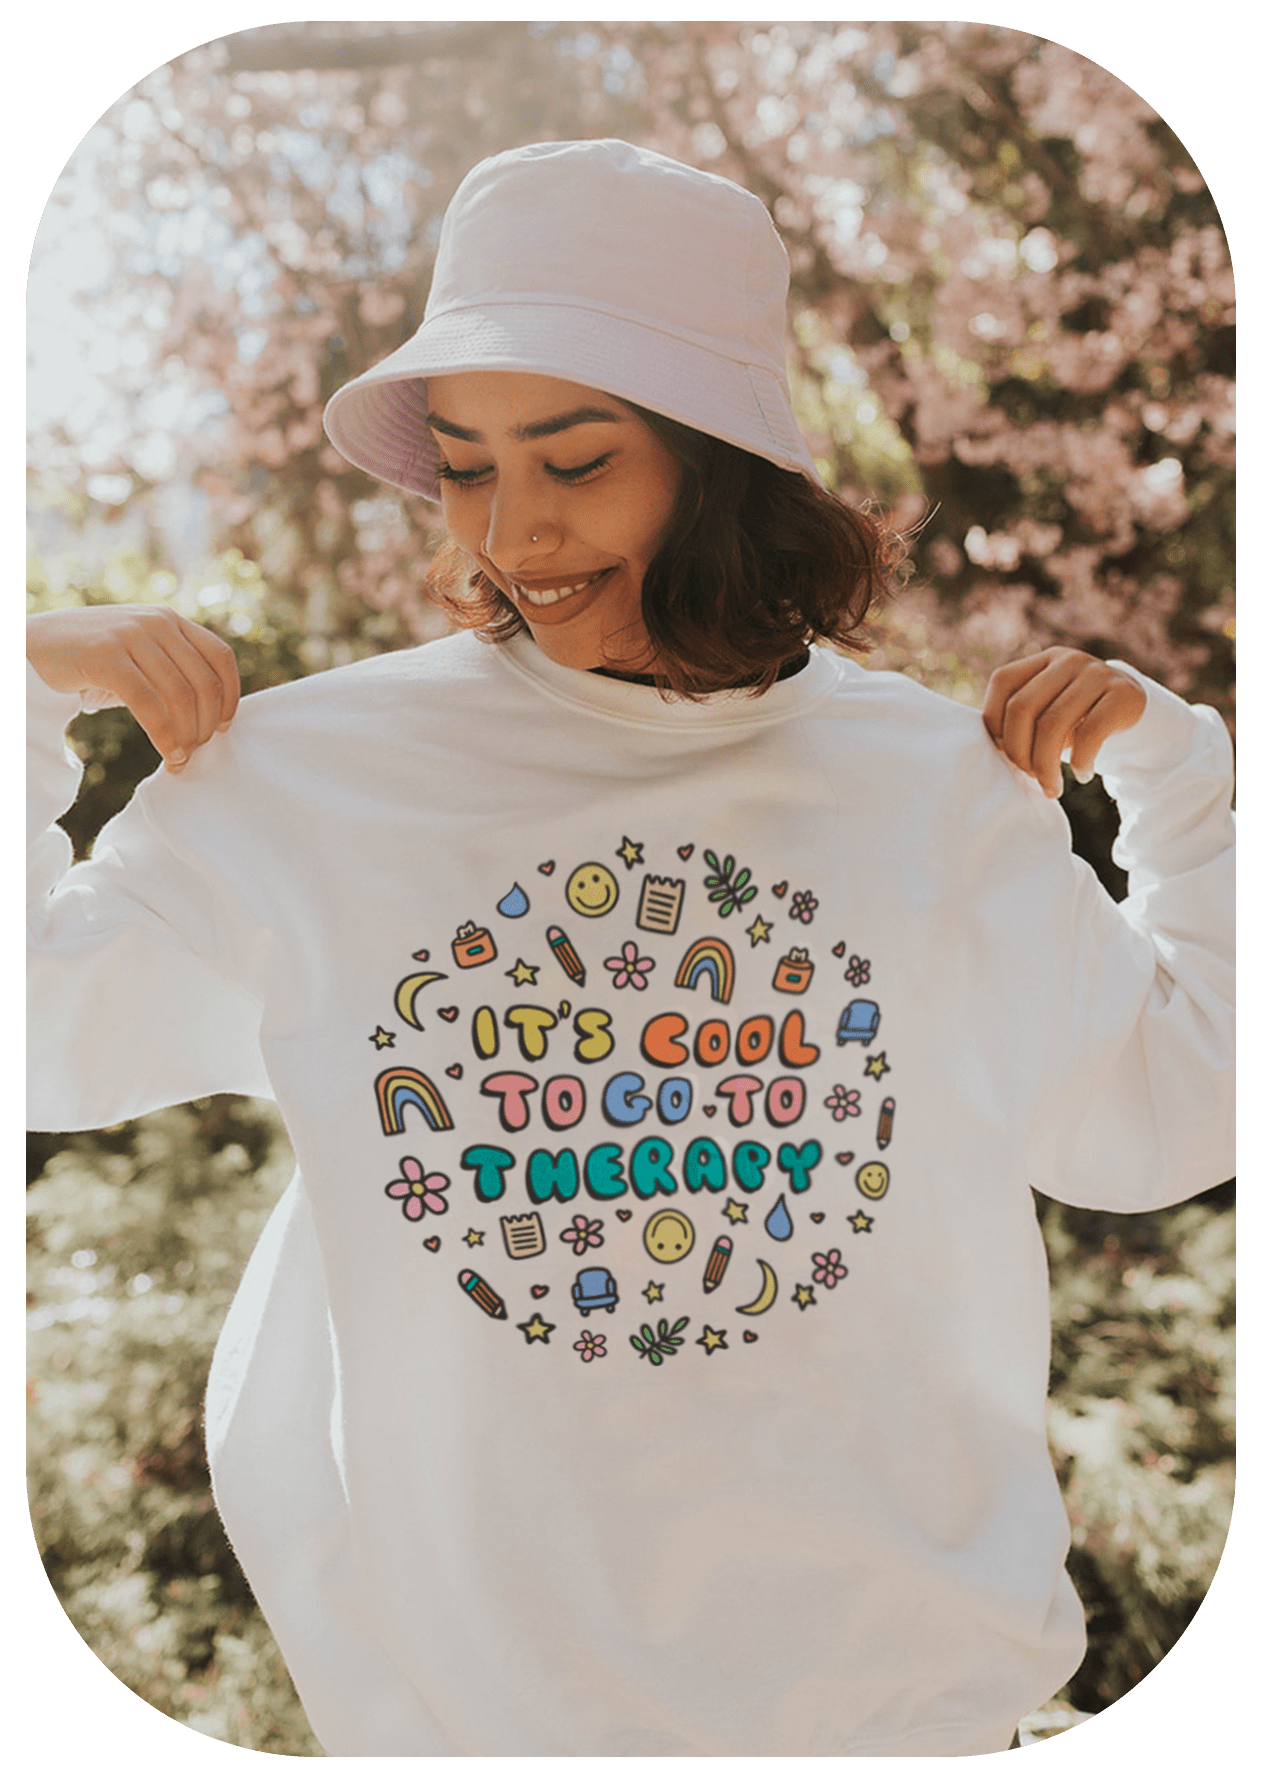 Going To Therapy Is Cool! - Sweatshirt – Self-Care Is For Everyone